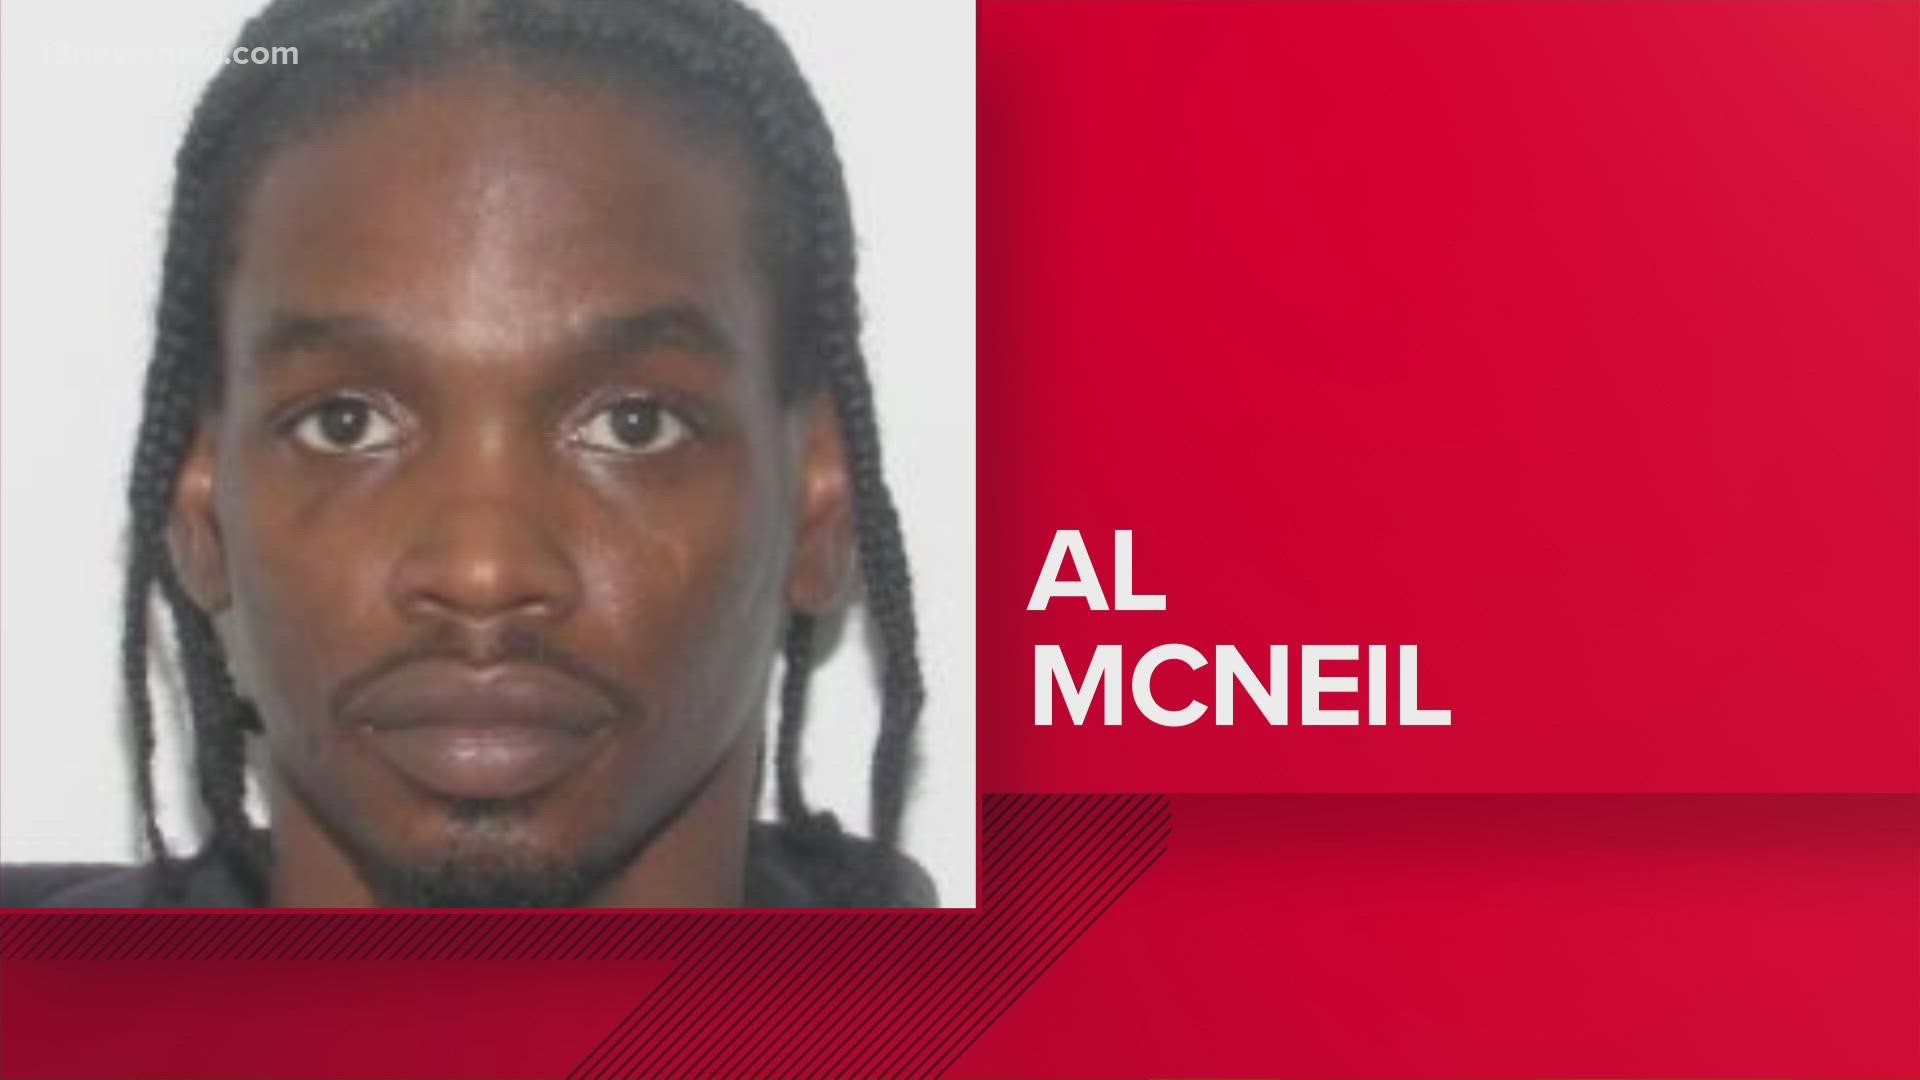 Al McNeil, the man accused of shooting a two-year-old boy to death last week, was granted bond during a hearing in Portsmouth.